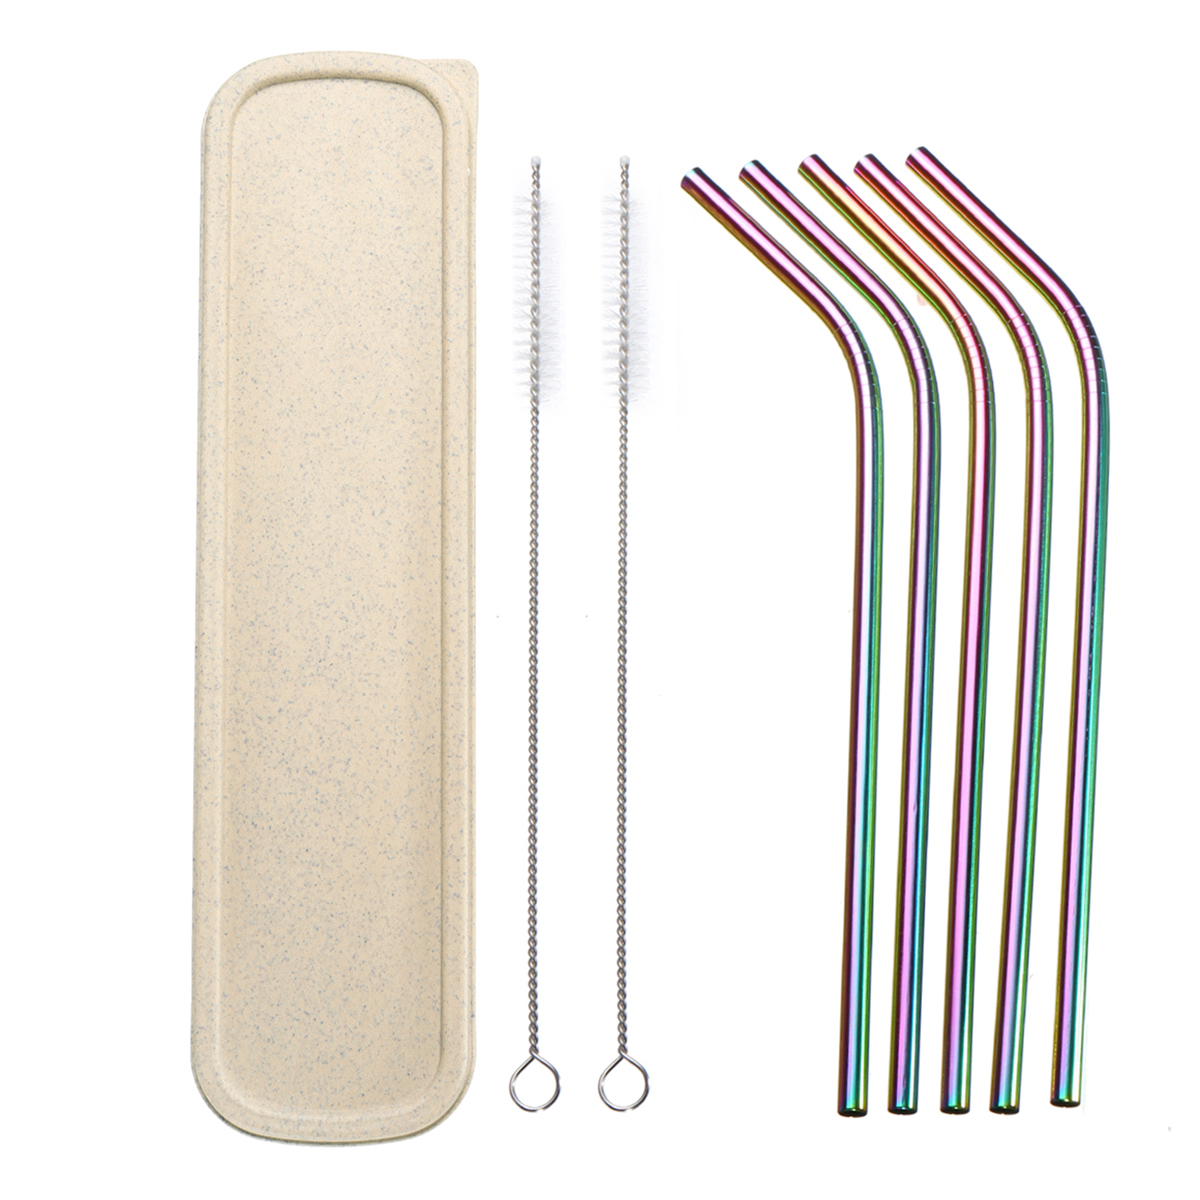 

8pcs Reusable Straw Stainless Steel Metal Straws Colorful Drinking Curved Straw With Cleaning Brush